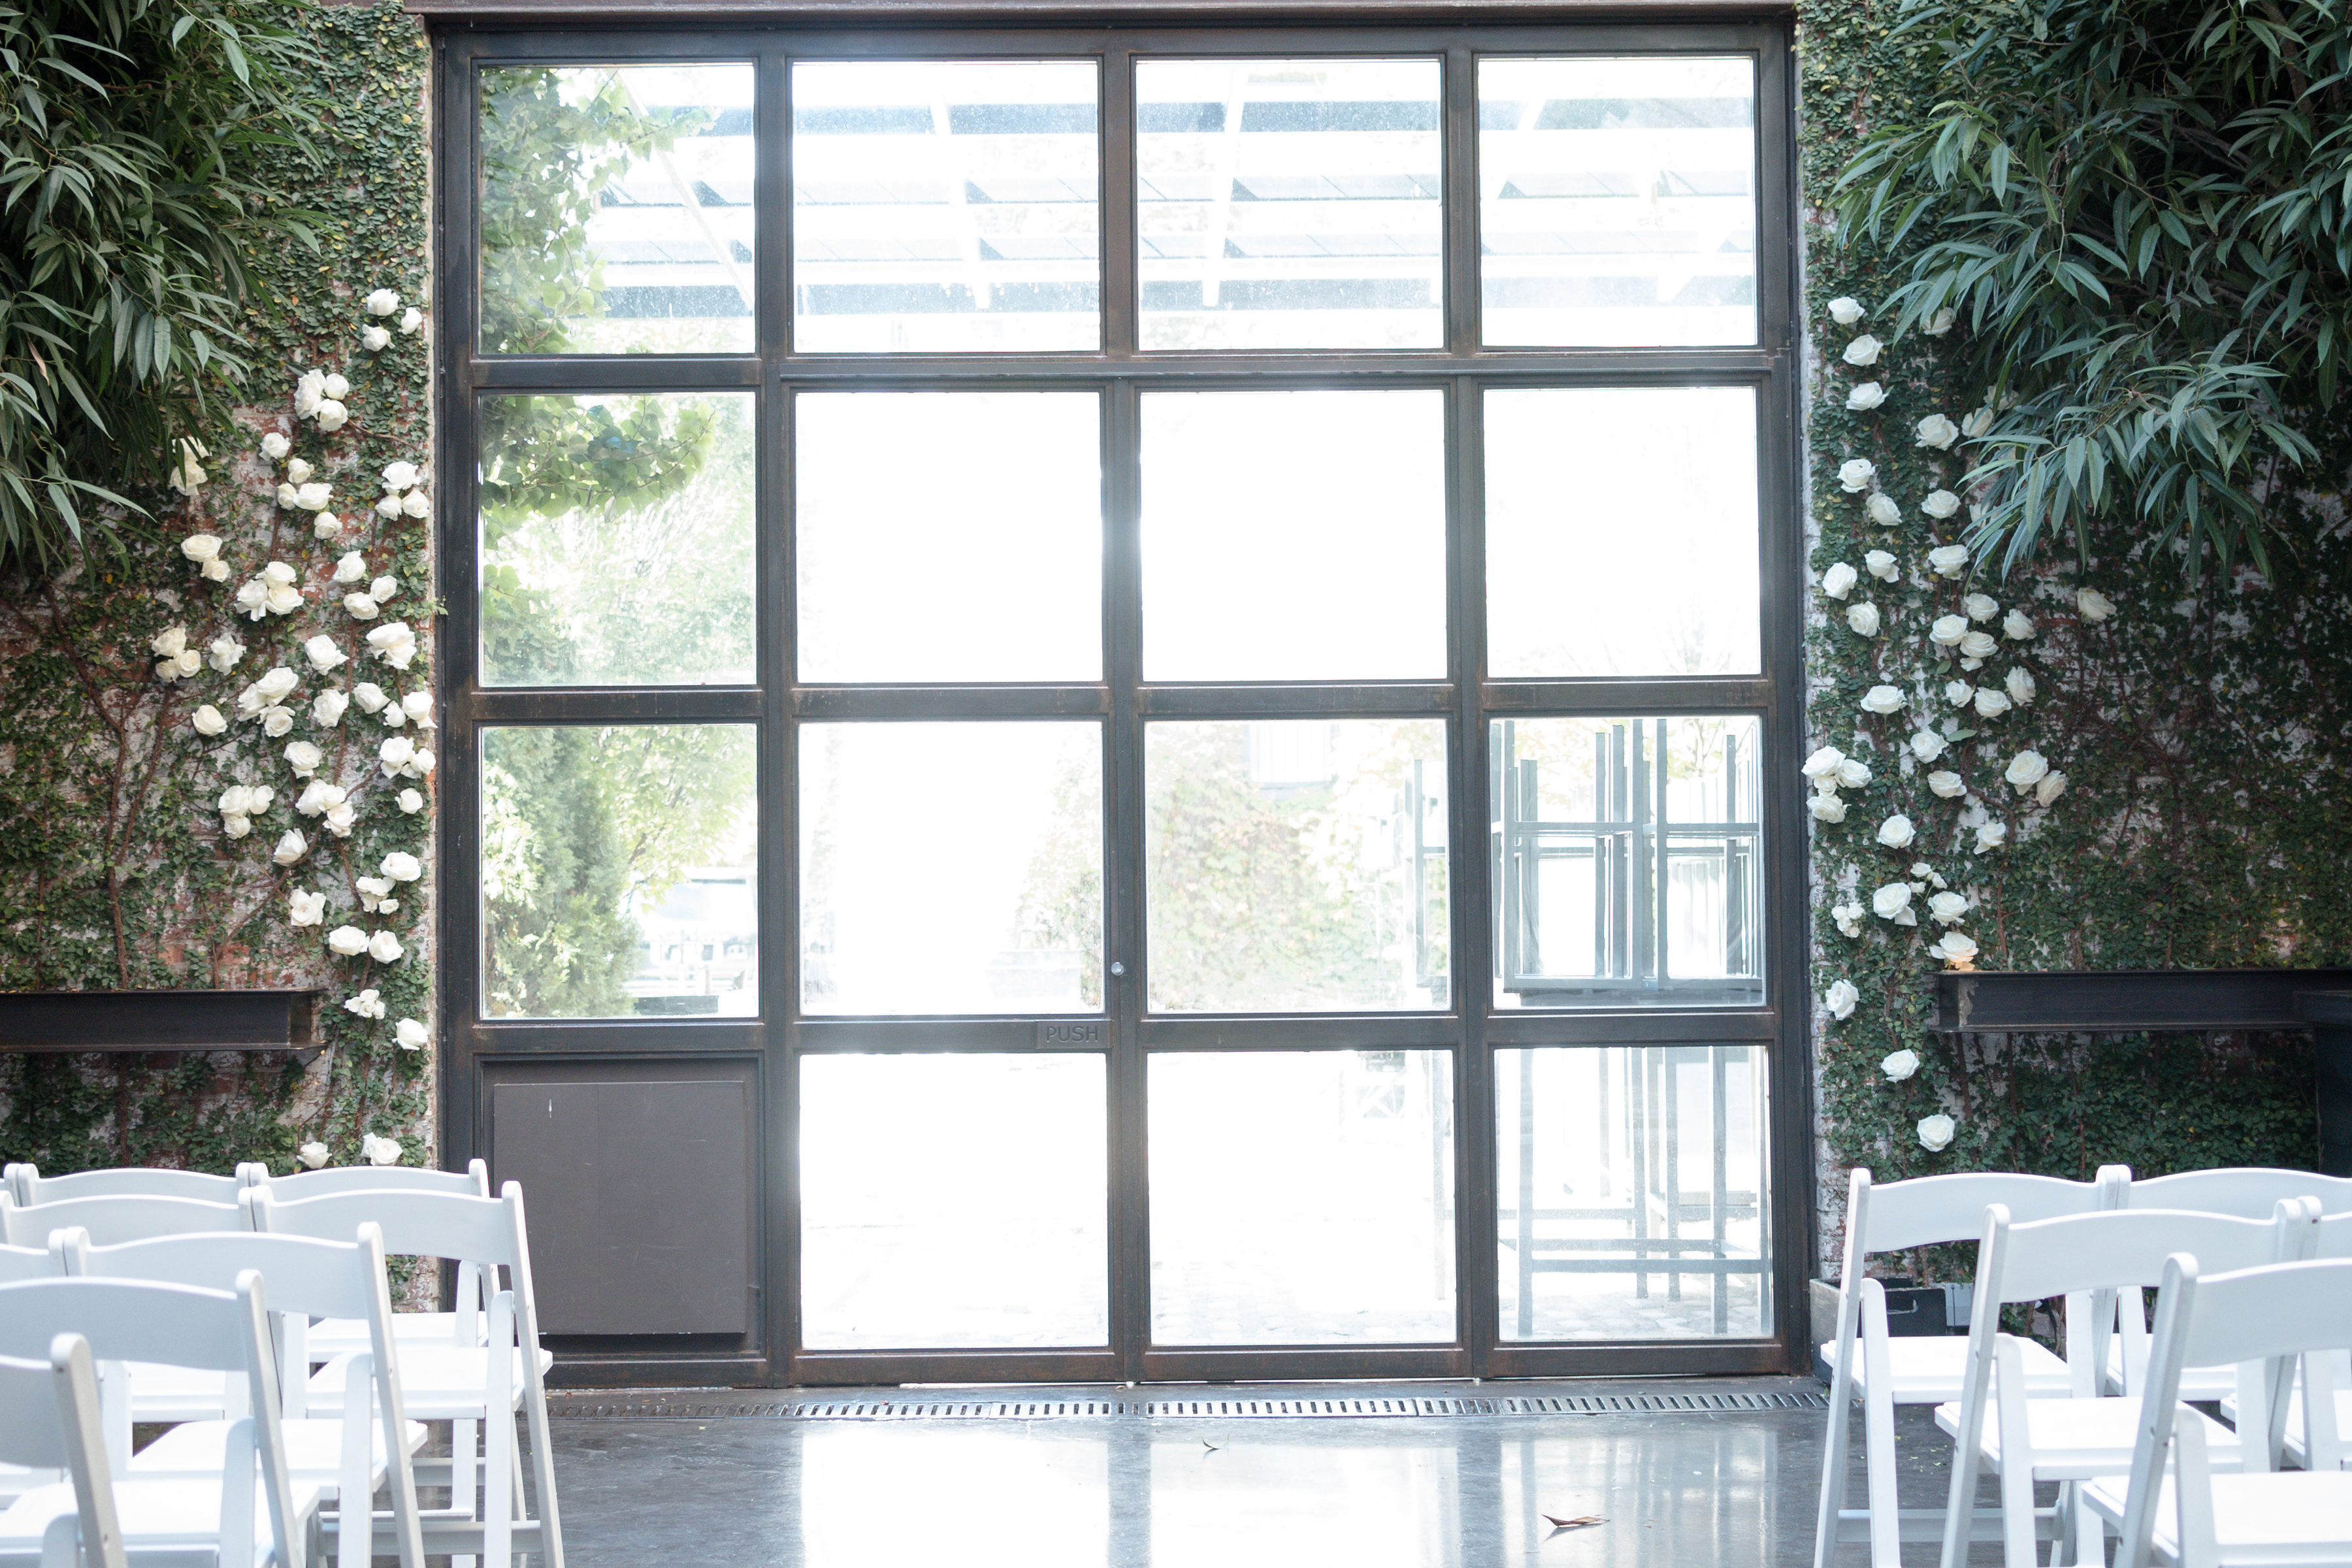 wedding ceremony site with green and white flowers